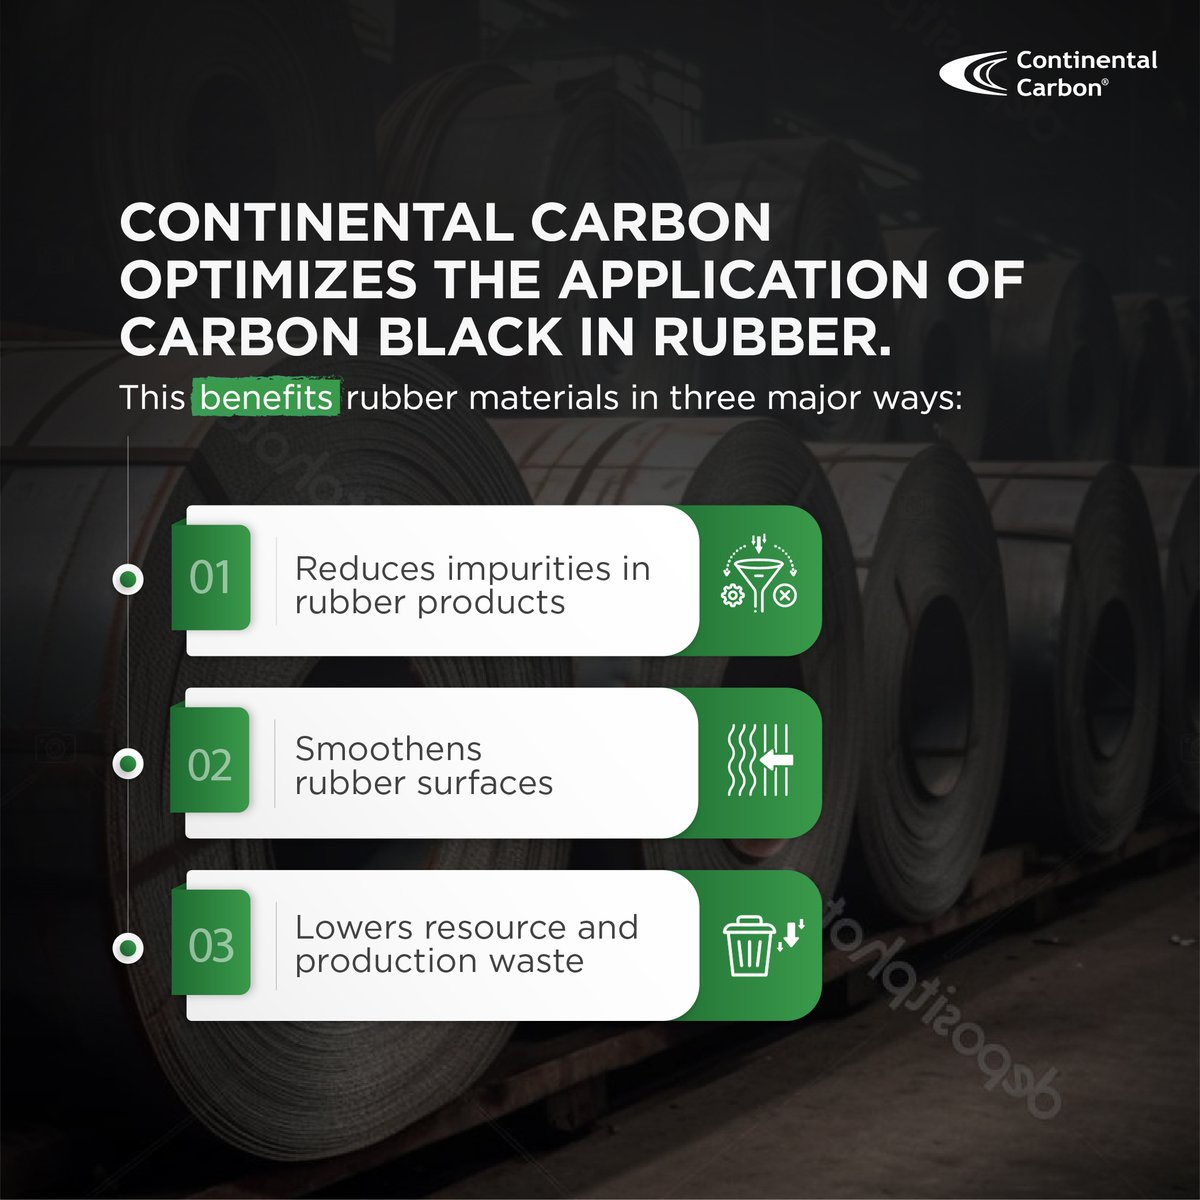 Continental Carbon’s optimized #carbonblack lowers the impurities in #rubber products. This is the fruit of Continental Carbon’s continual efforts towards upgrading its #innovations and providing the best to its #customers.

#ContinentalCarbon #CommittedtoDeliver #Rubberwaste